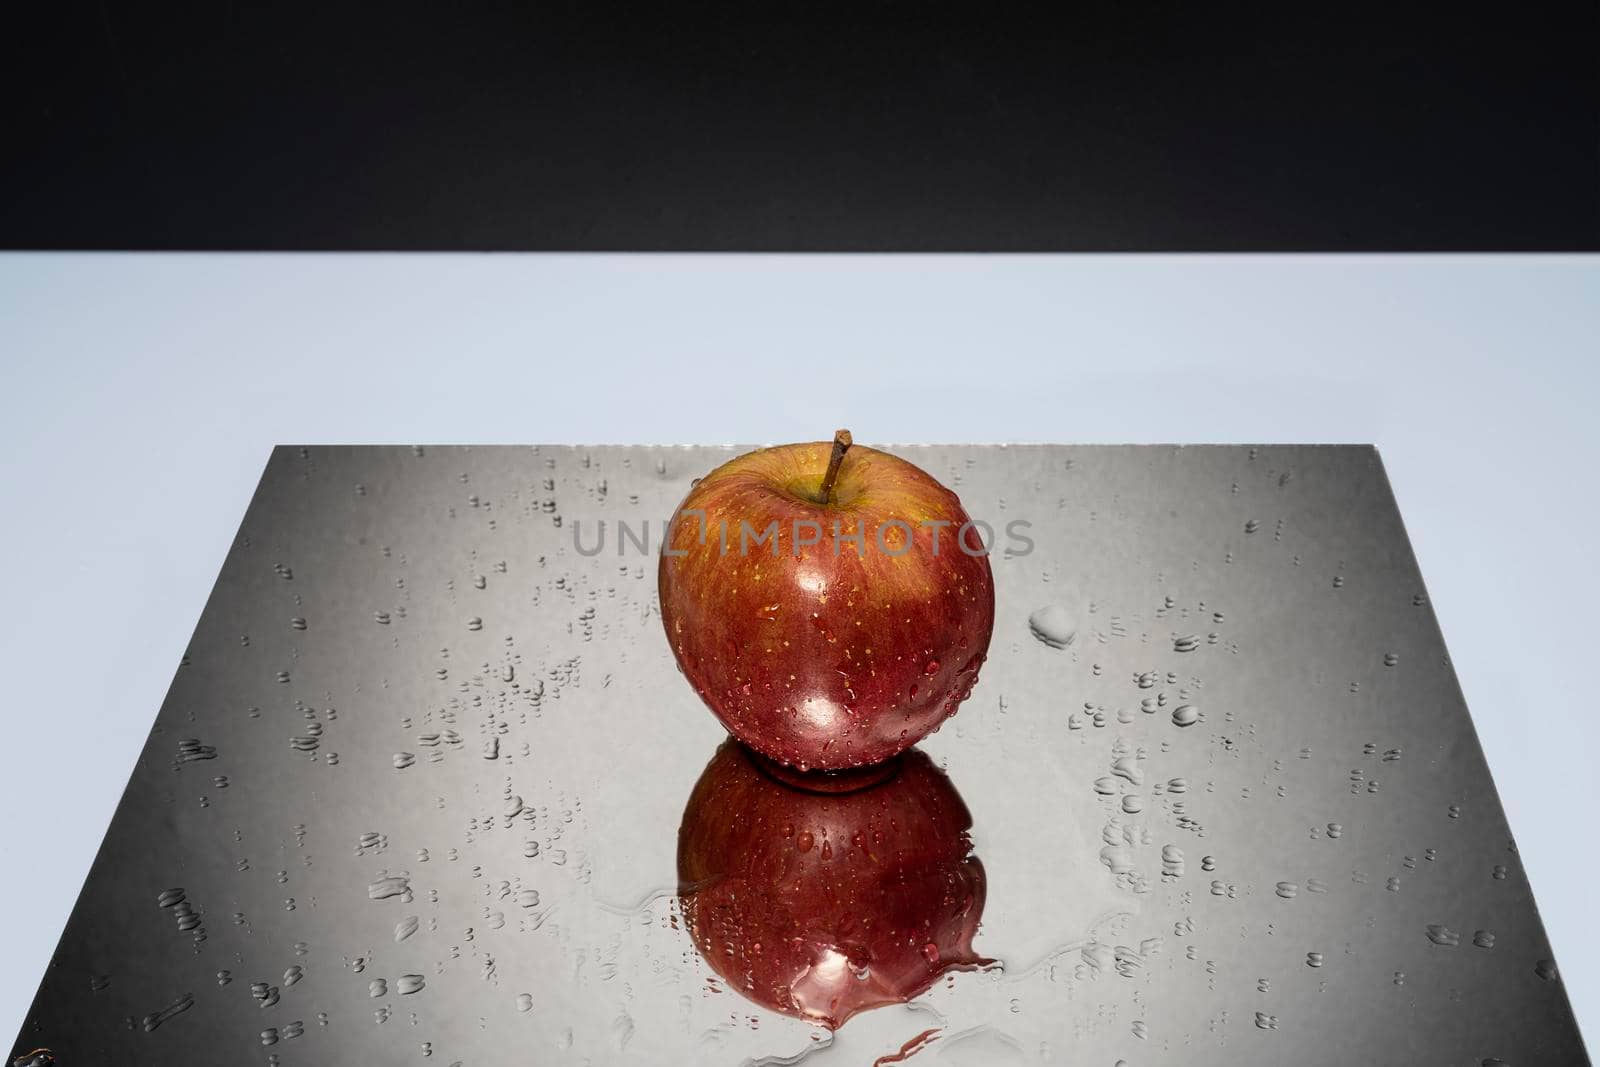 A red apple resting on a mirror with falling water drops